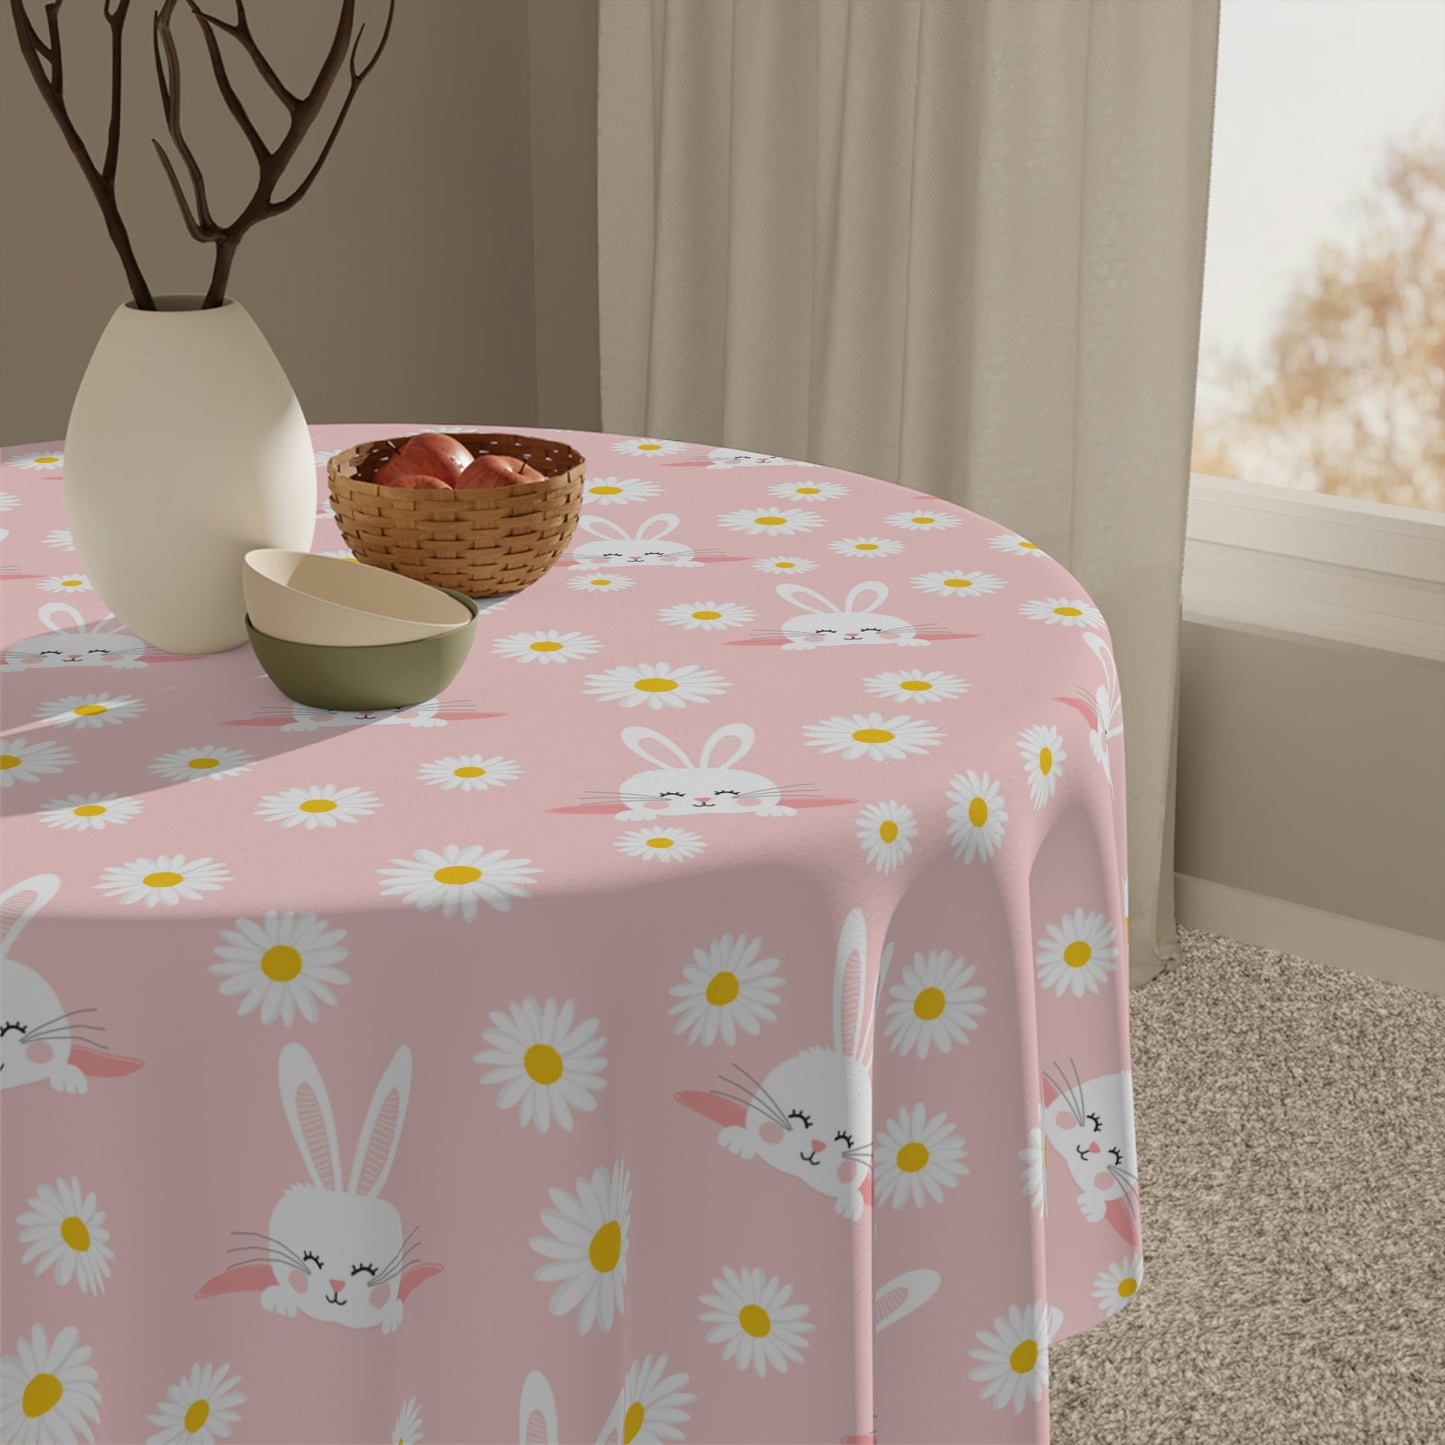 Smiling Bunnies and Daisies Tablecloth